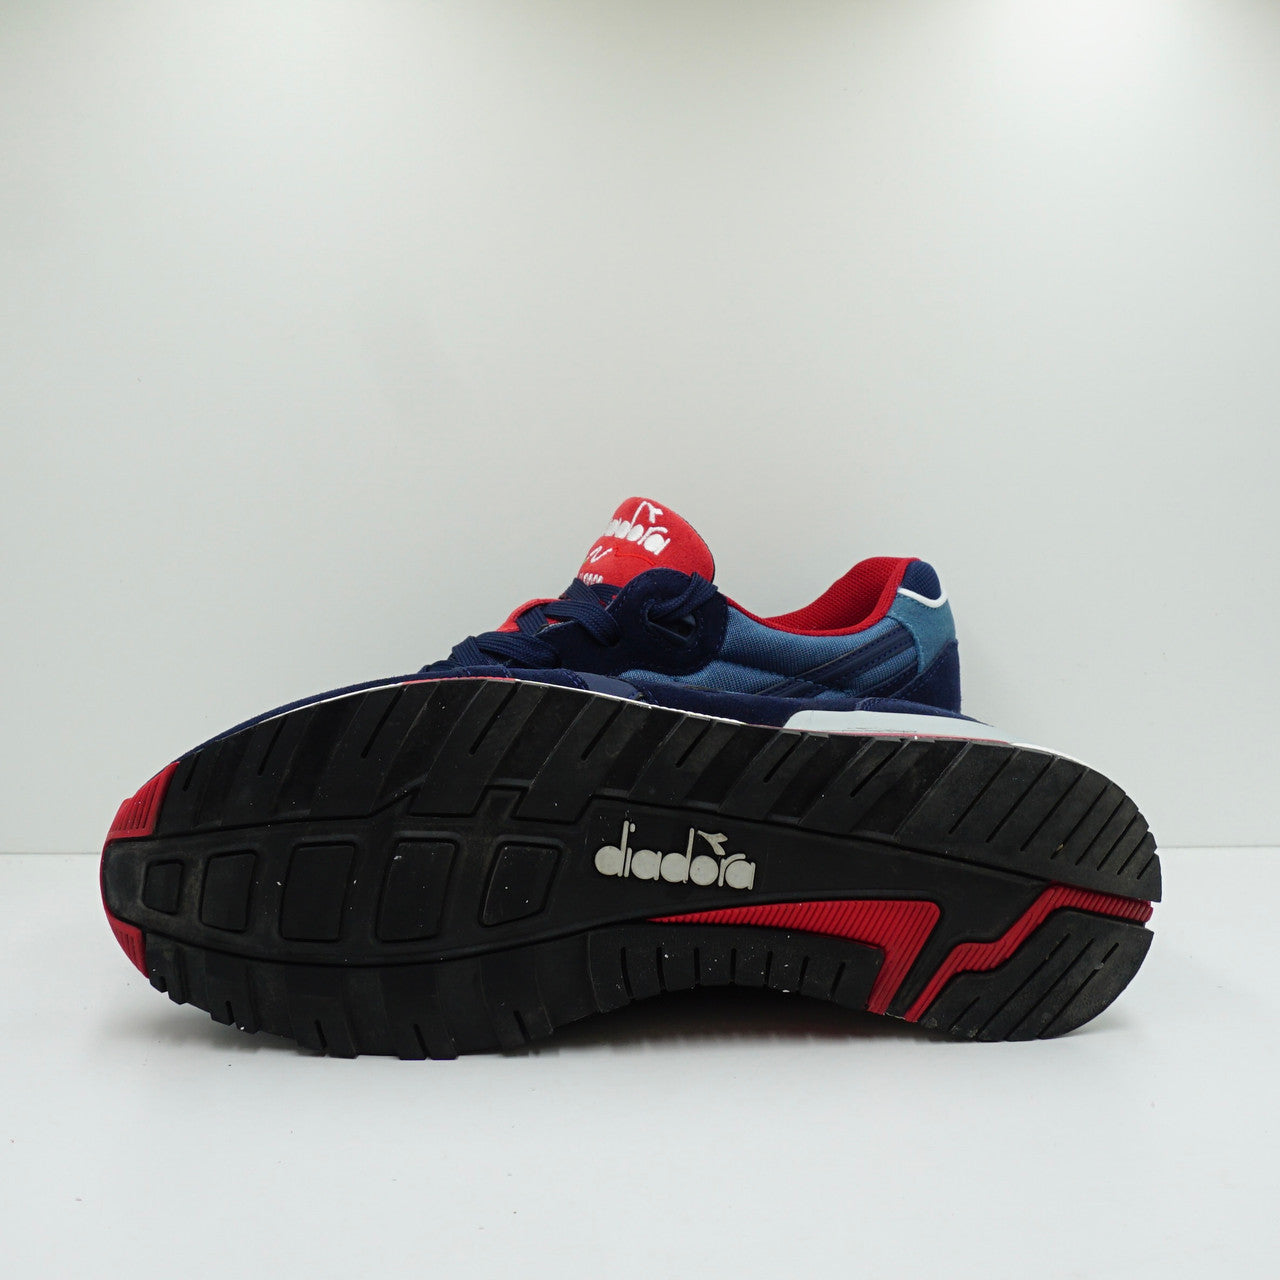 Diadora N9000 Heritage Made in Italy Navy Red